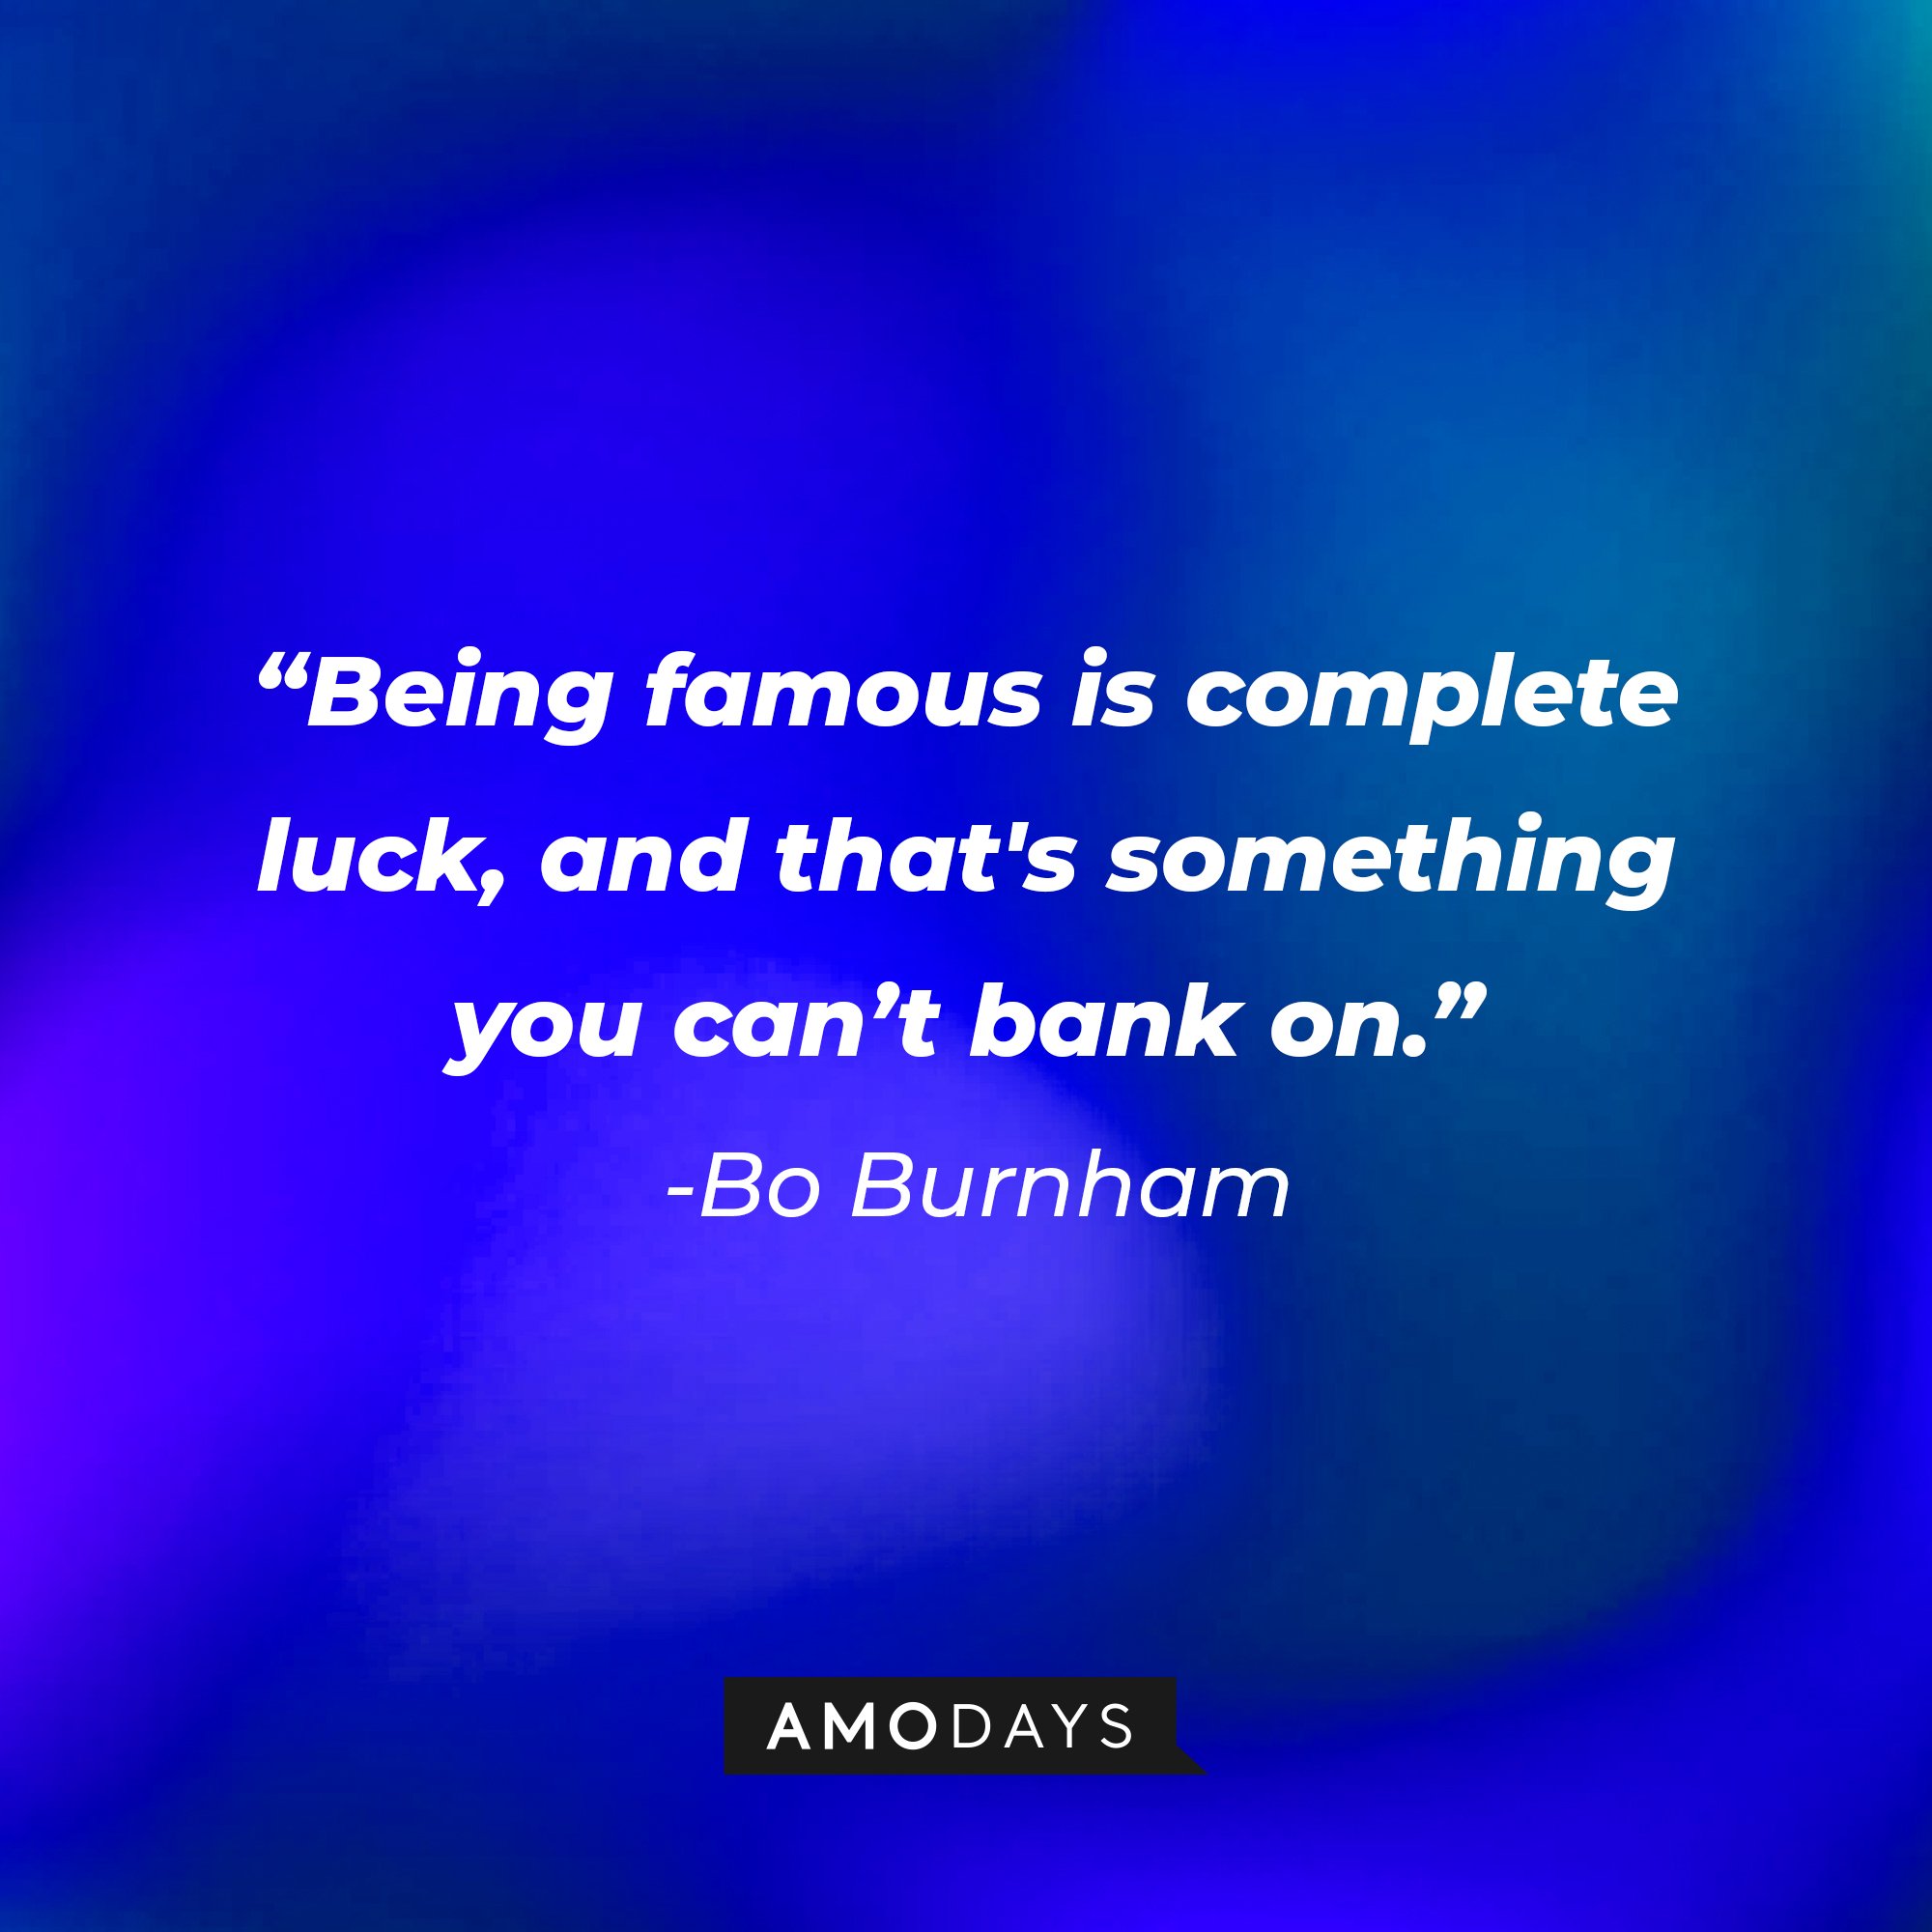 Bo Burnham's quote: "Being famous is complete luck, and that's something you can't bank on." | Image: AmoDays